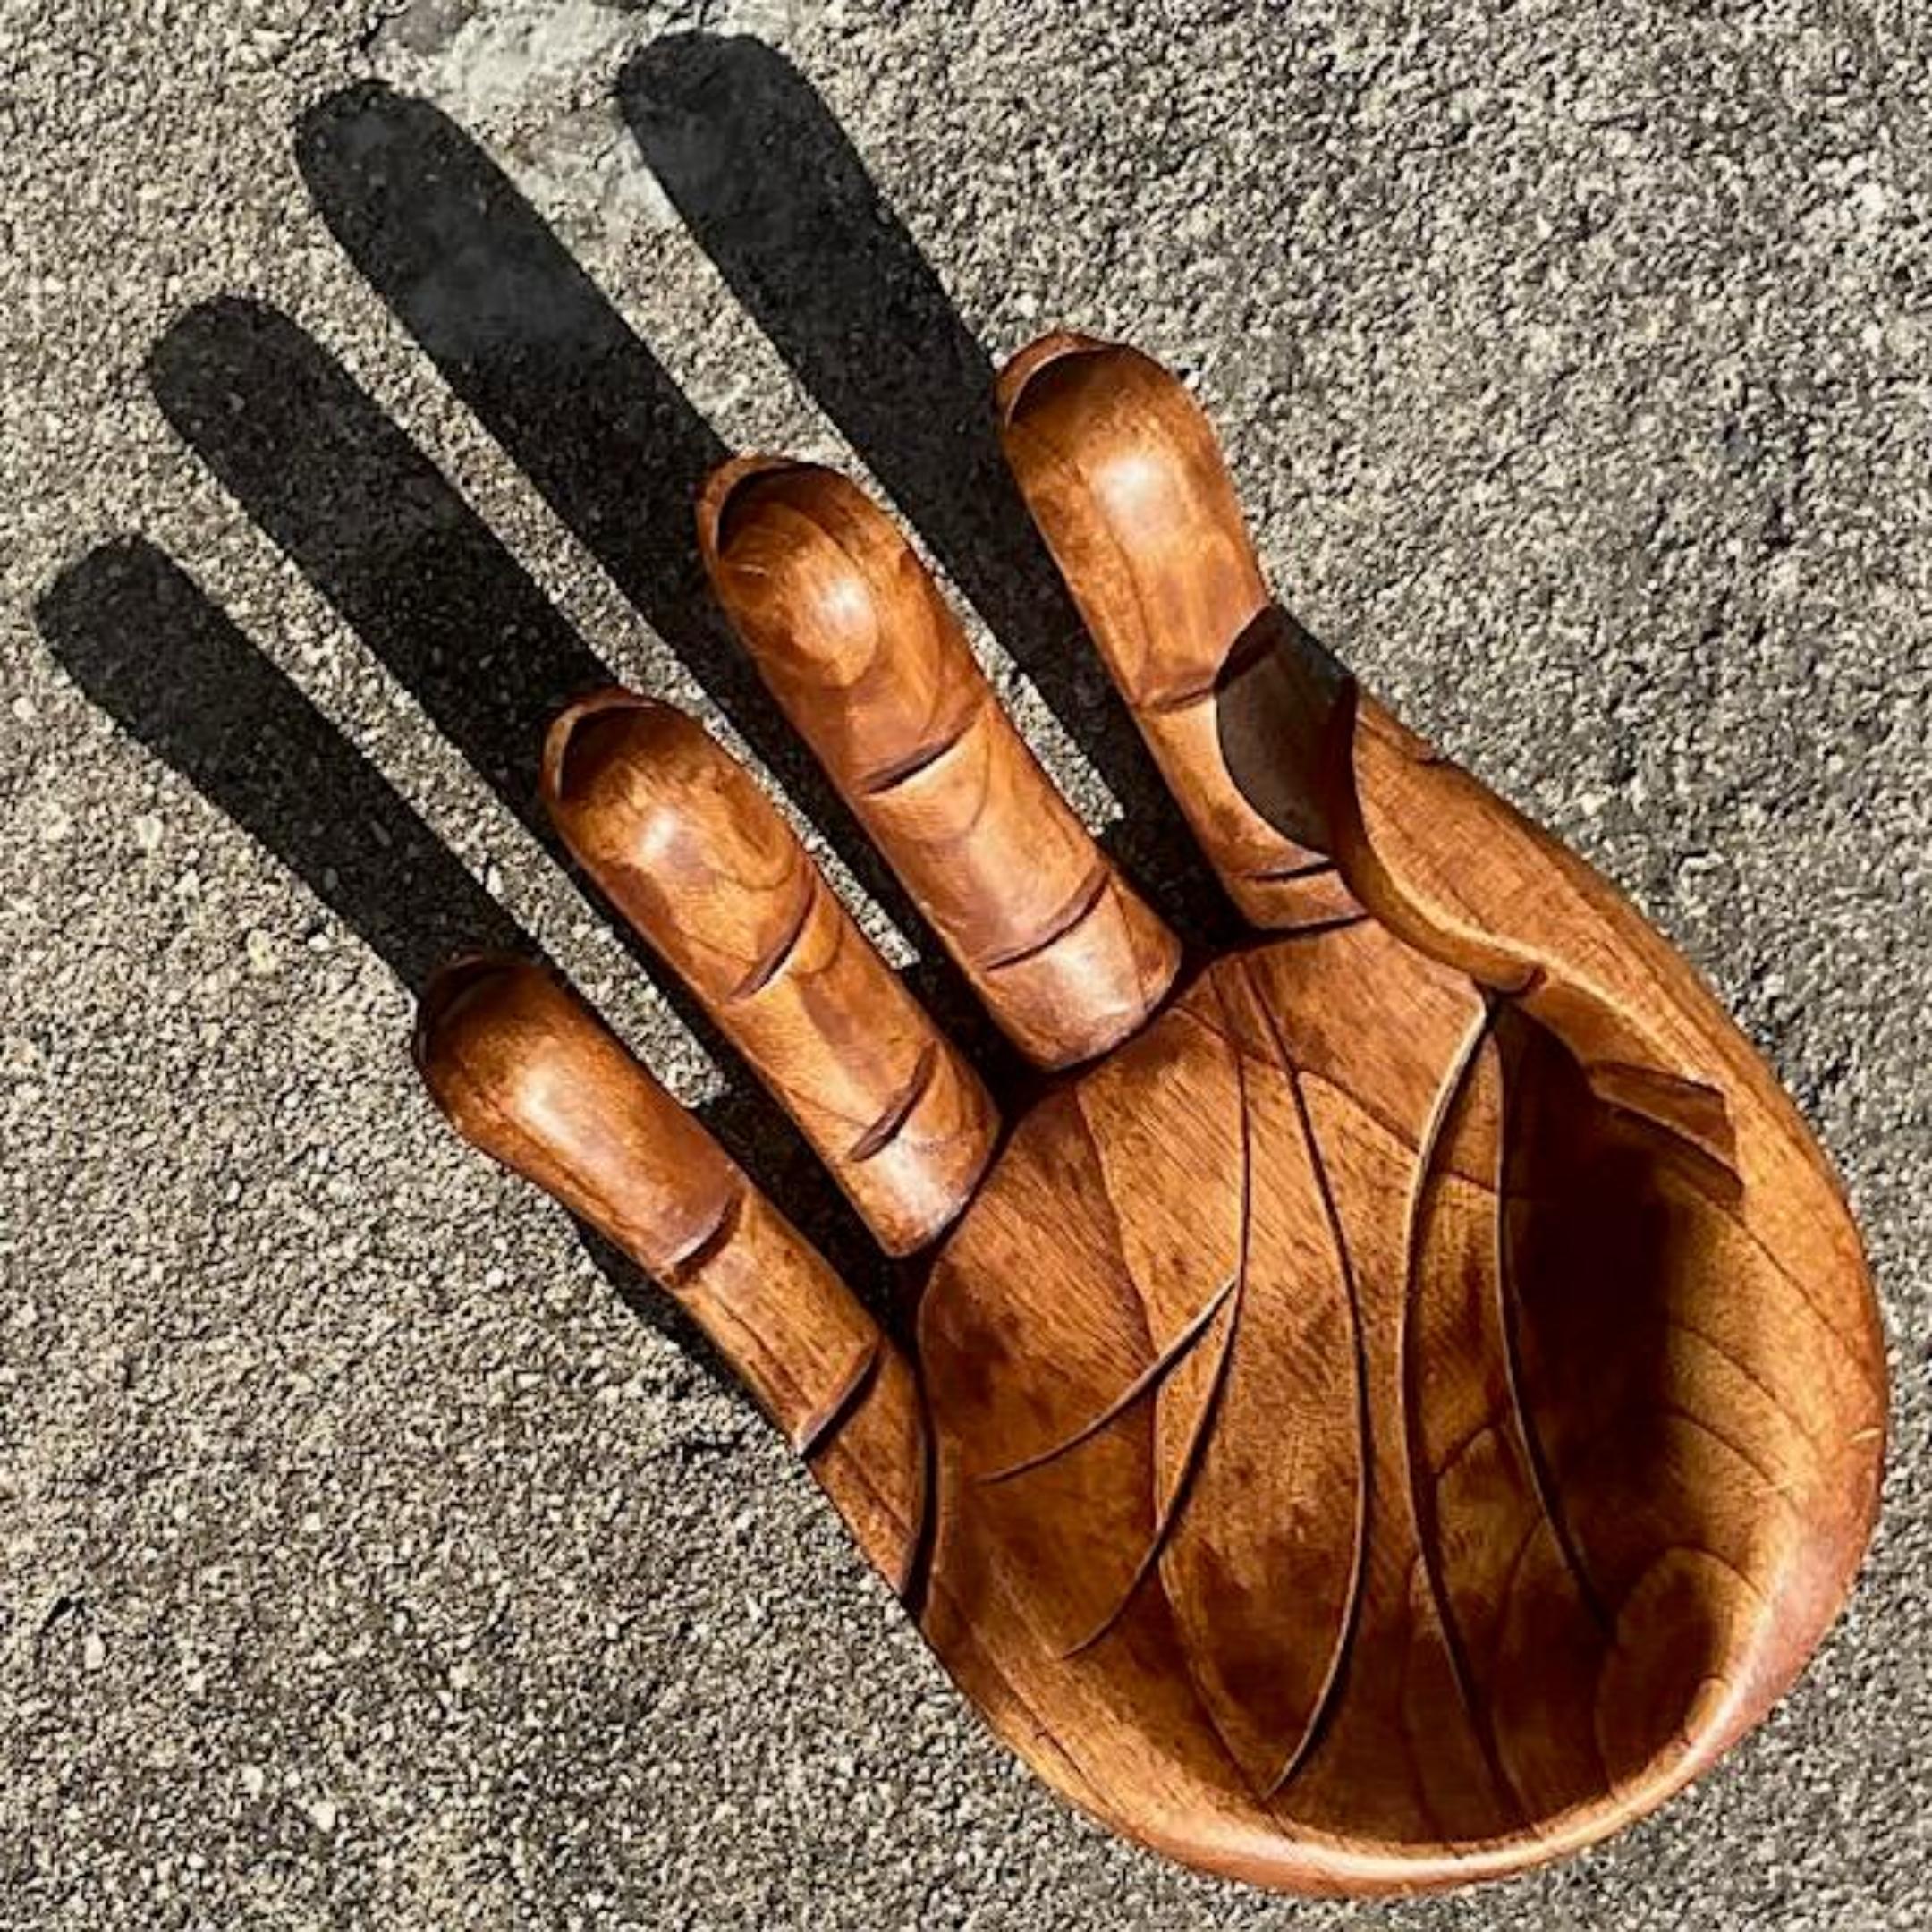 A fabulous vintage Boho wood hand. A chic carved creation with lots of surface detail. Perfect as is or pill the center with your treasured objects. A really beautiful piece. Acquired from a Palm Beach estate.